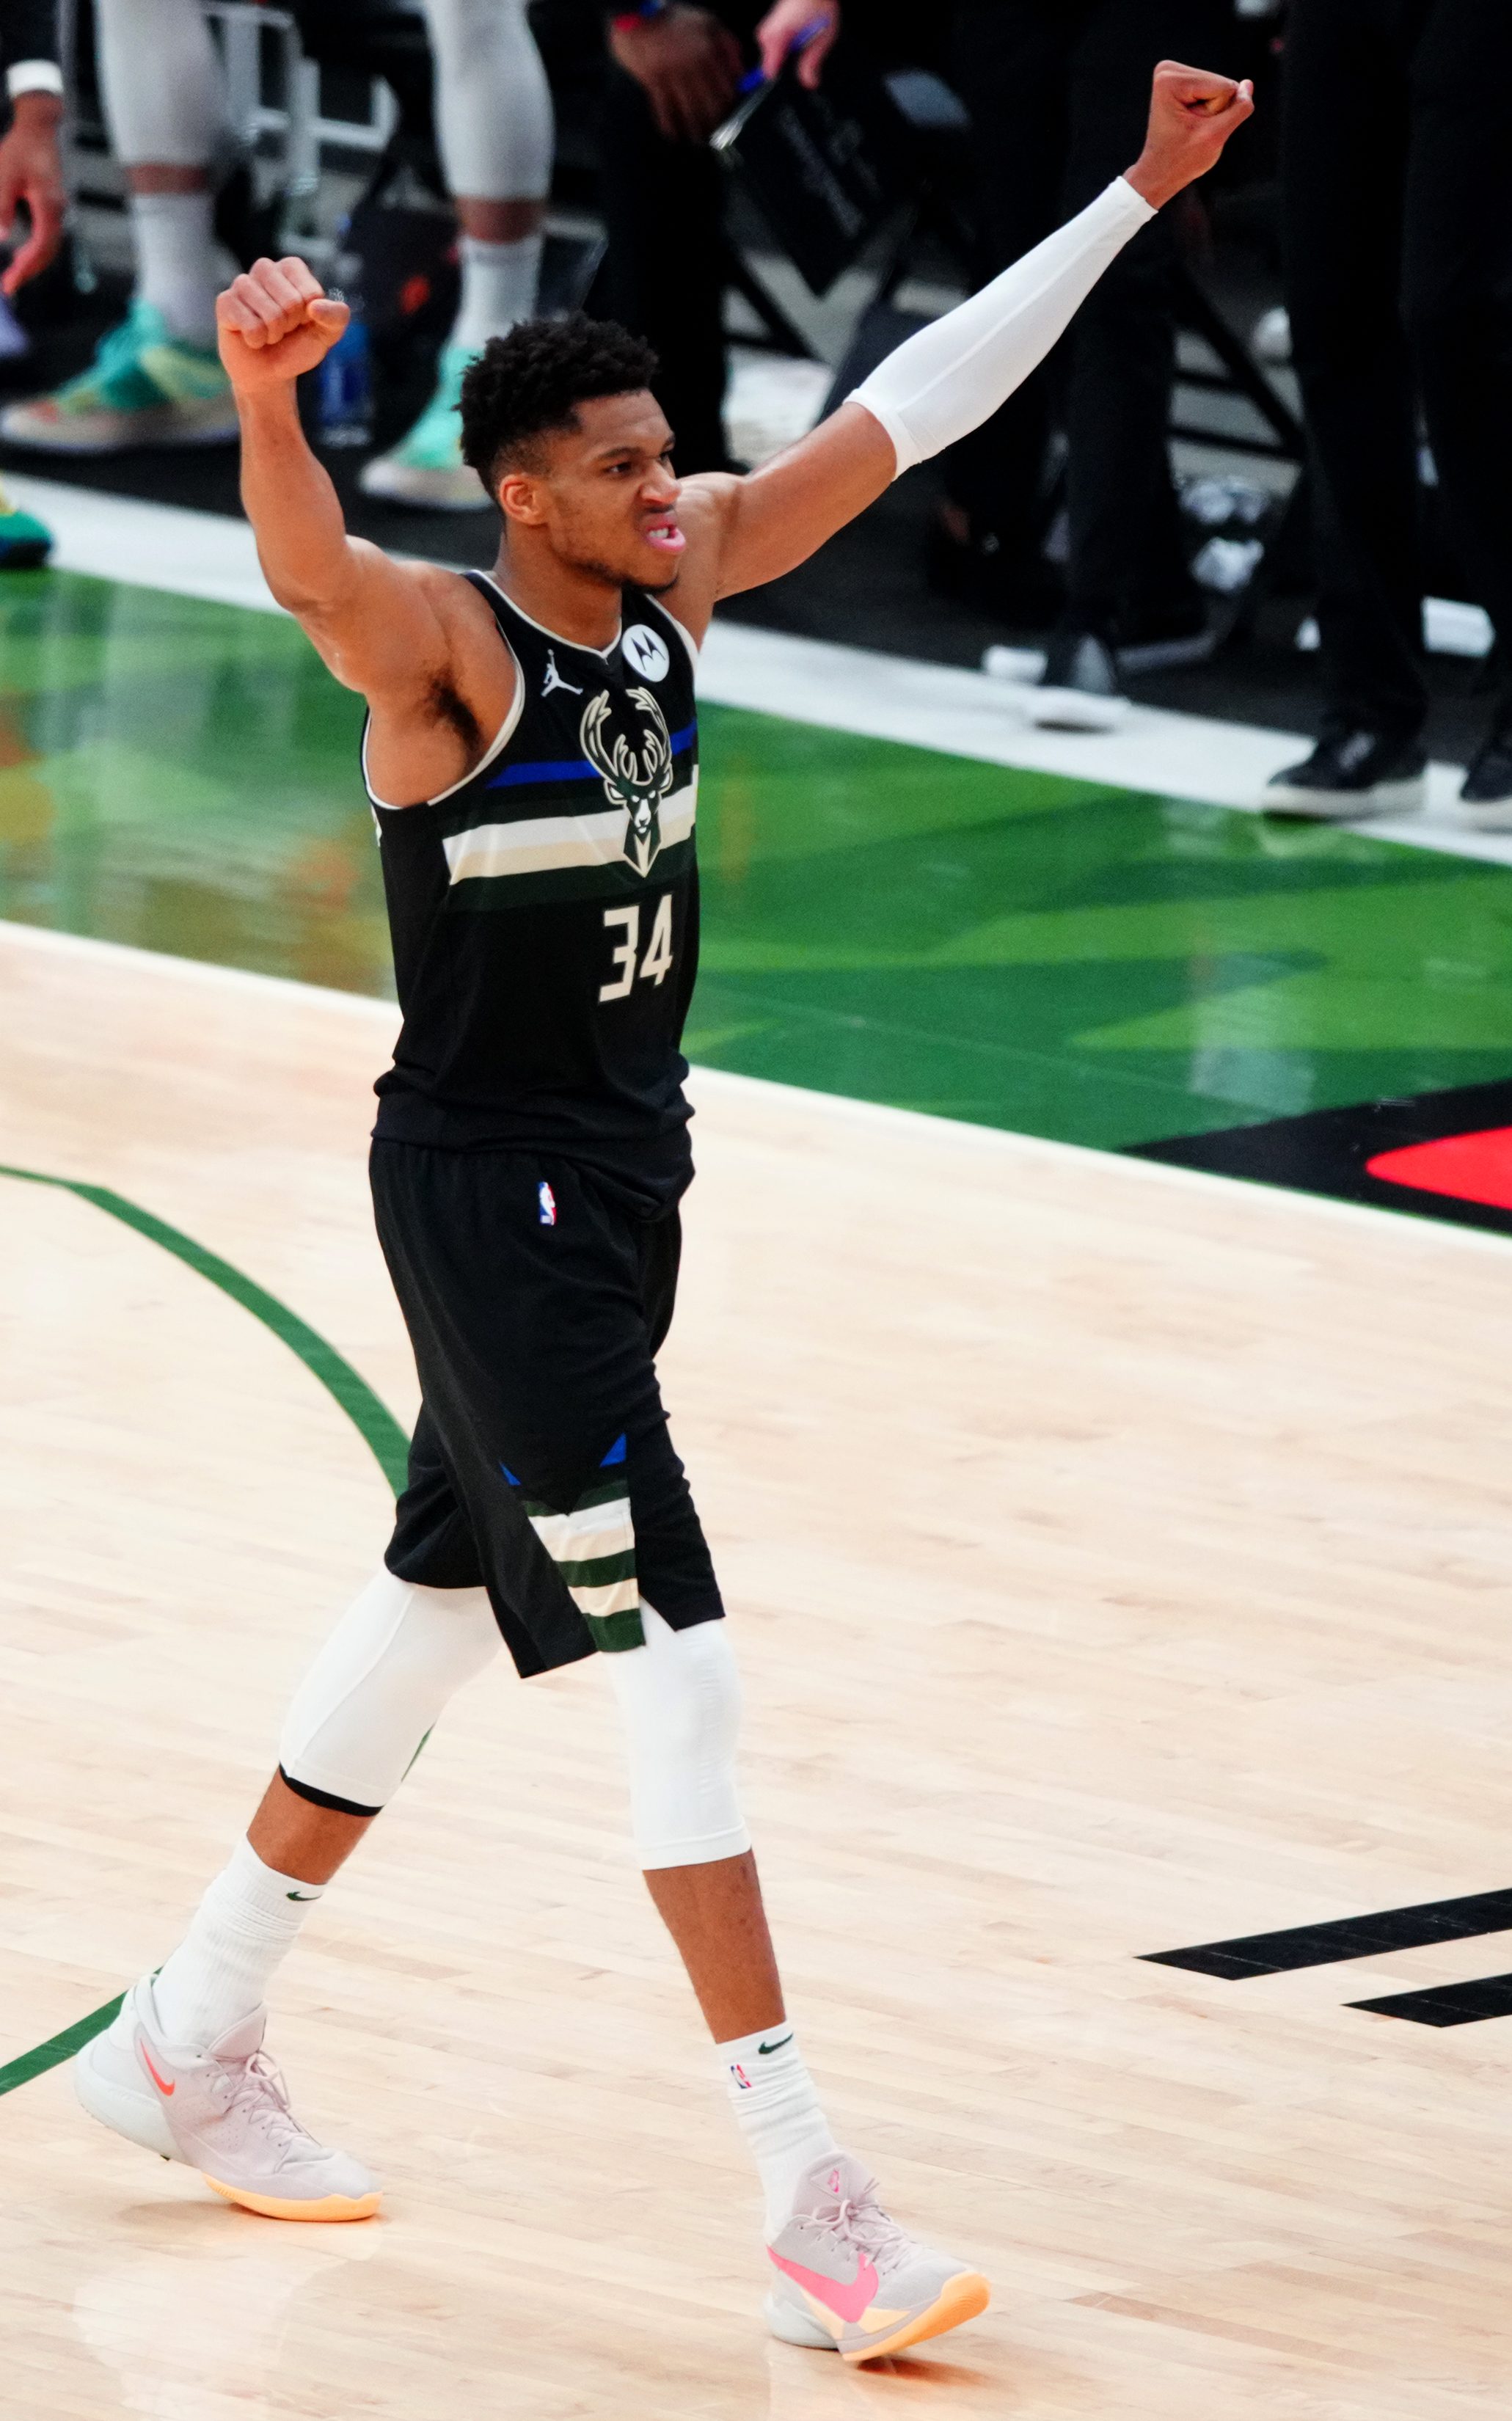 LOOK: Giannis completes Kobe’s challenge after leading Bucks to NBA title